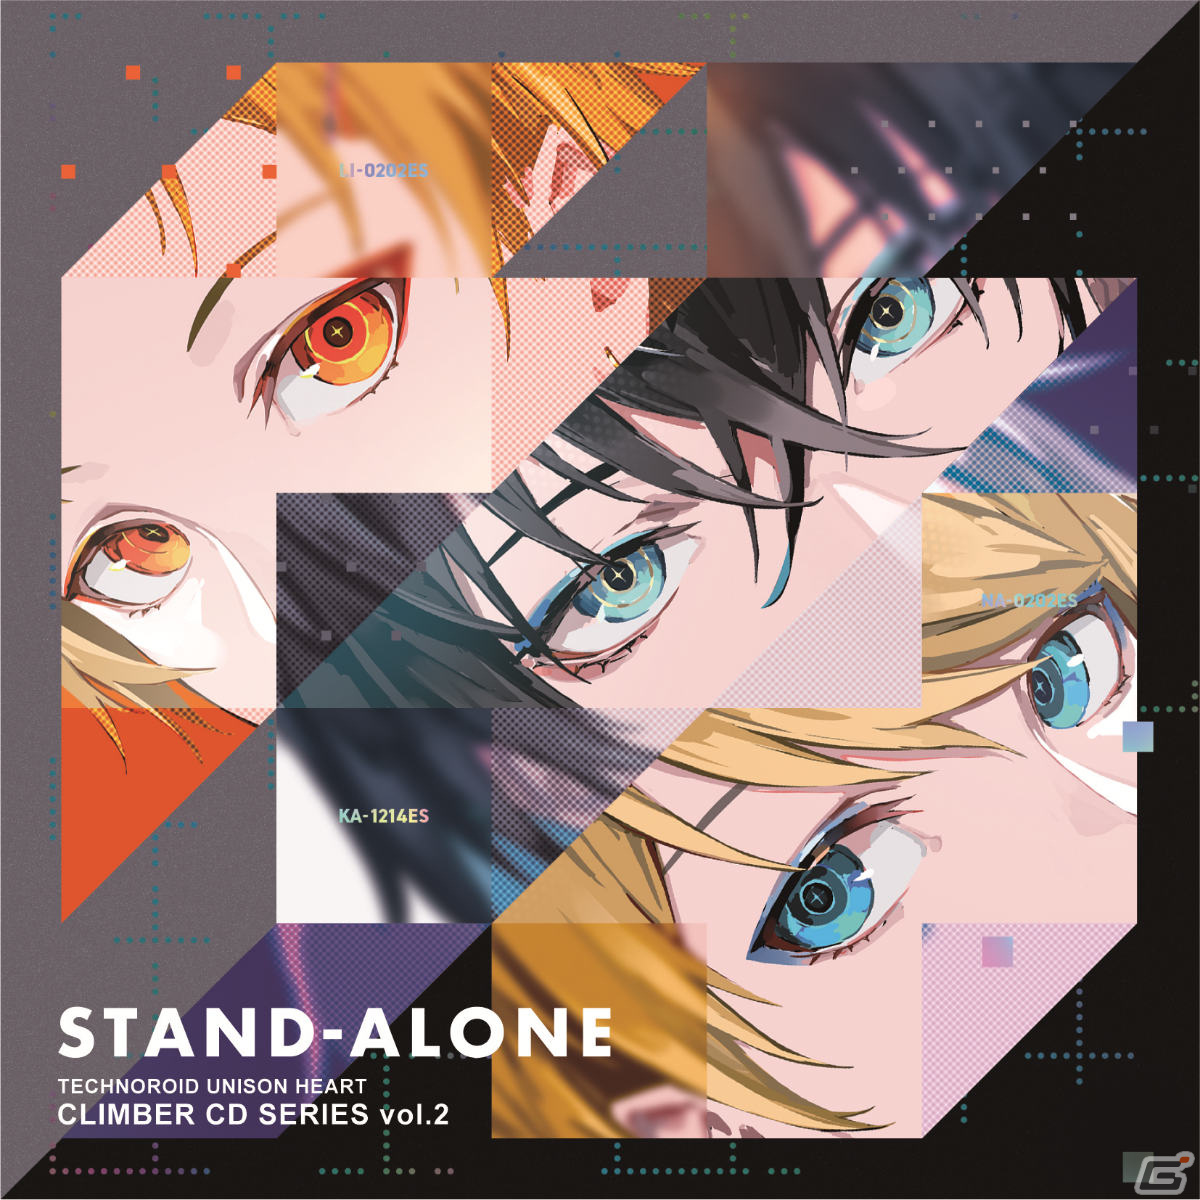 Cover art for『STAND-ALONE - Not Standing Alone』from the release『TECHNOROID UNISON HEART CLIMBER CD SERIES vol.2』